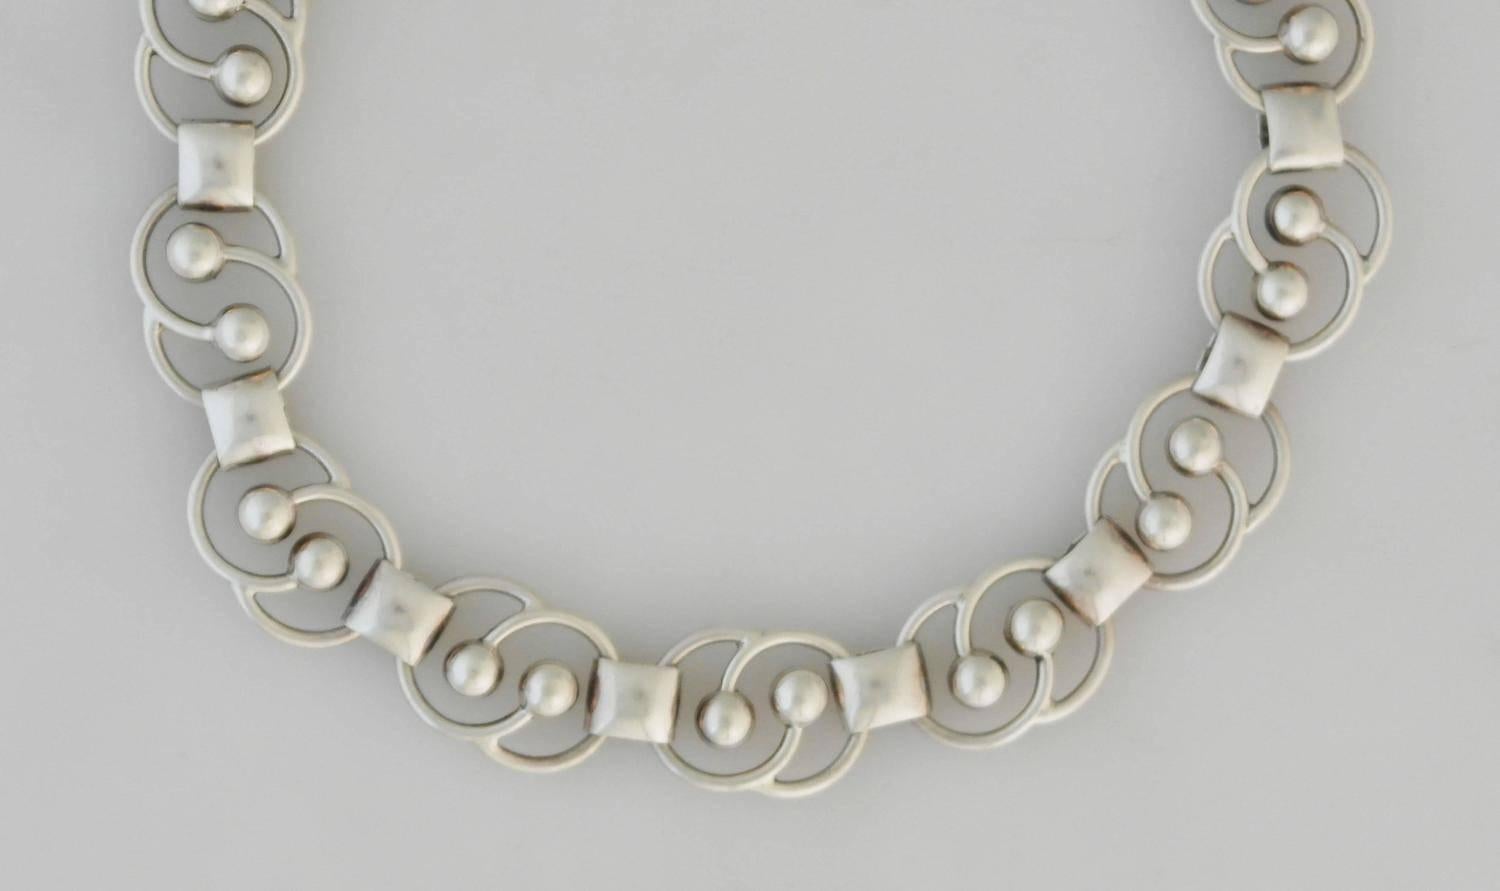 Early Hector Aguilar Sterling Silver Necklace 1955 Circular Link Motif For Sale 3